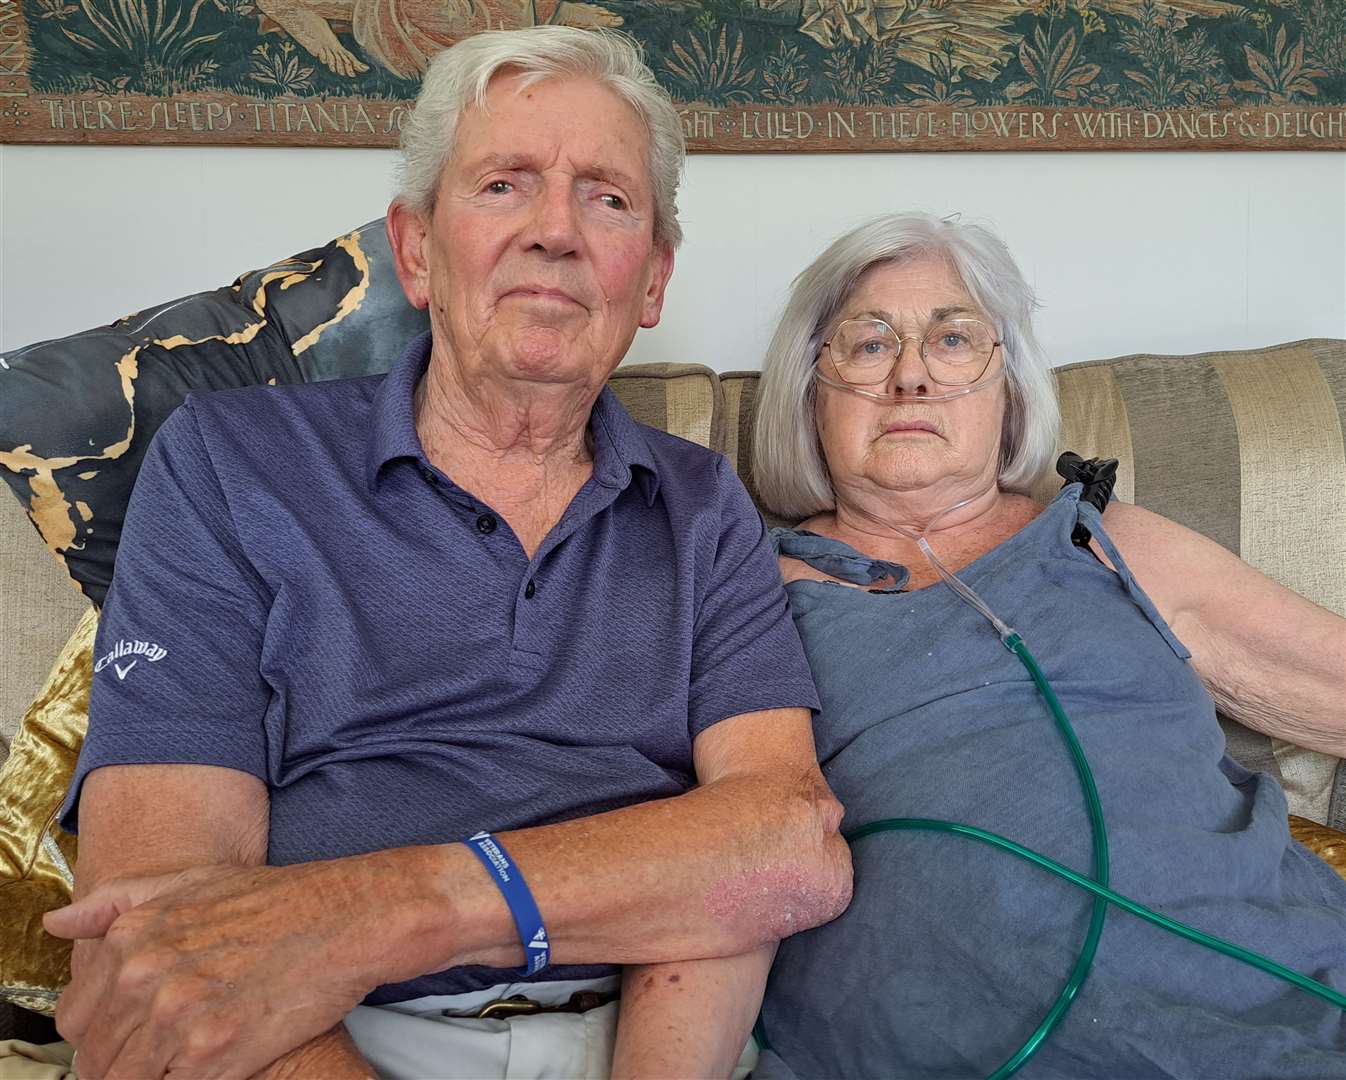 Bob and Jean Kelly made an official complaint to East Kent Hospitals